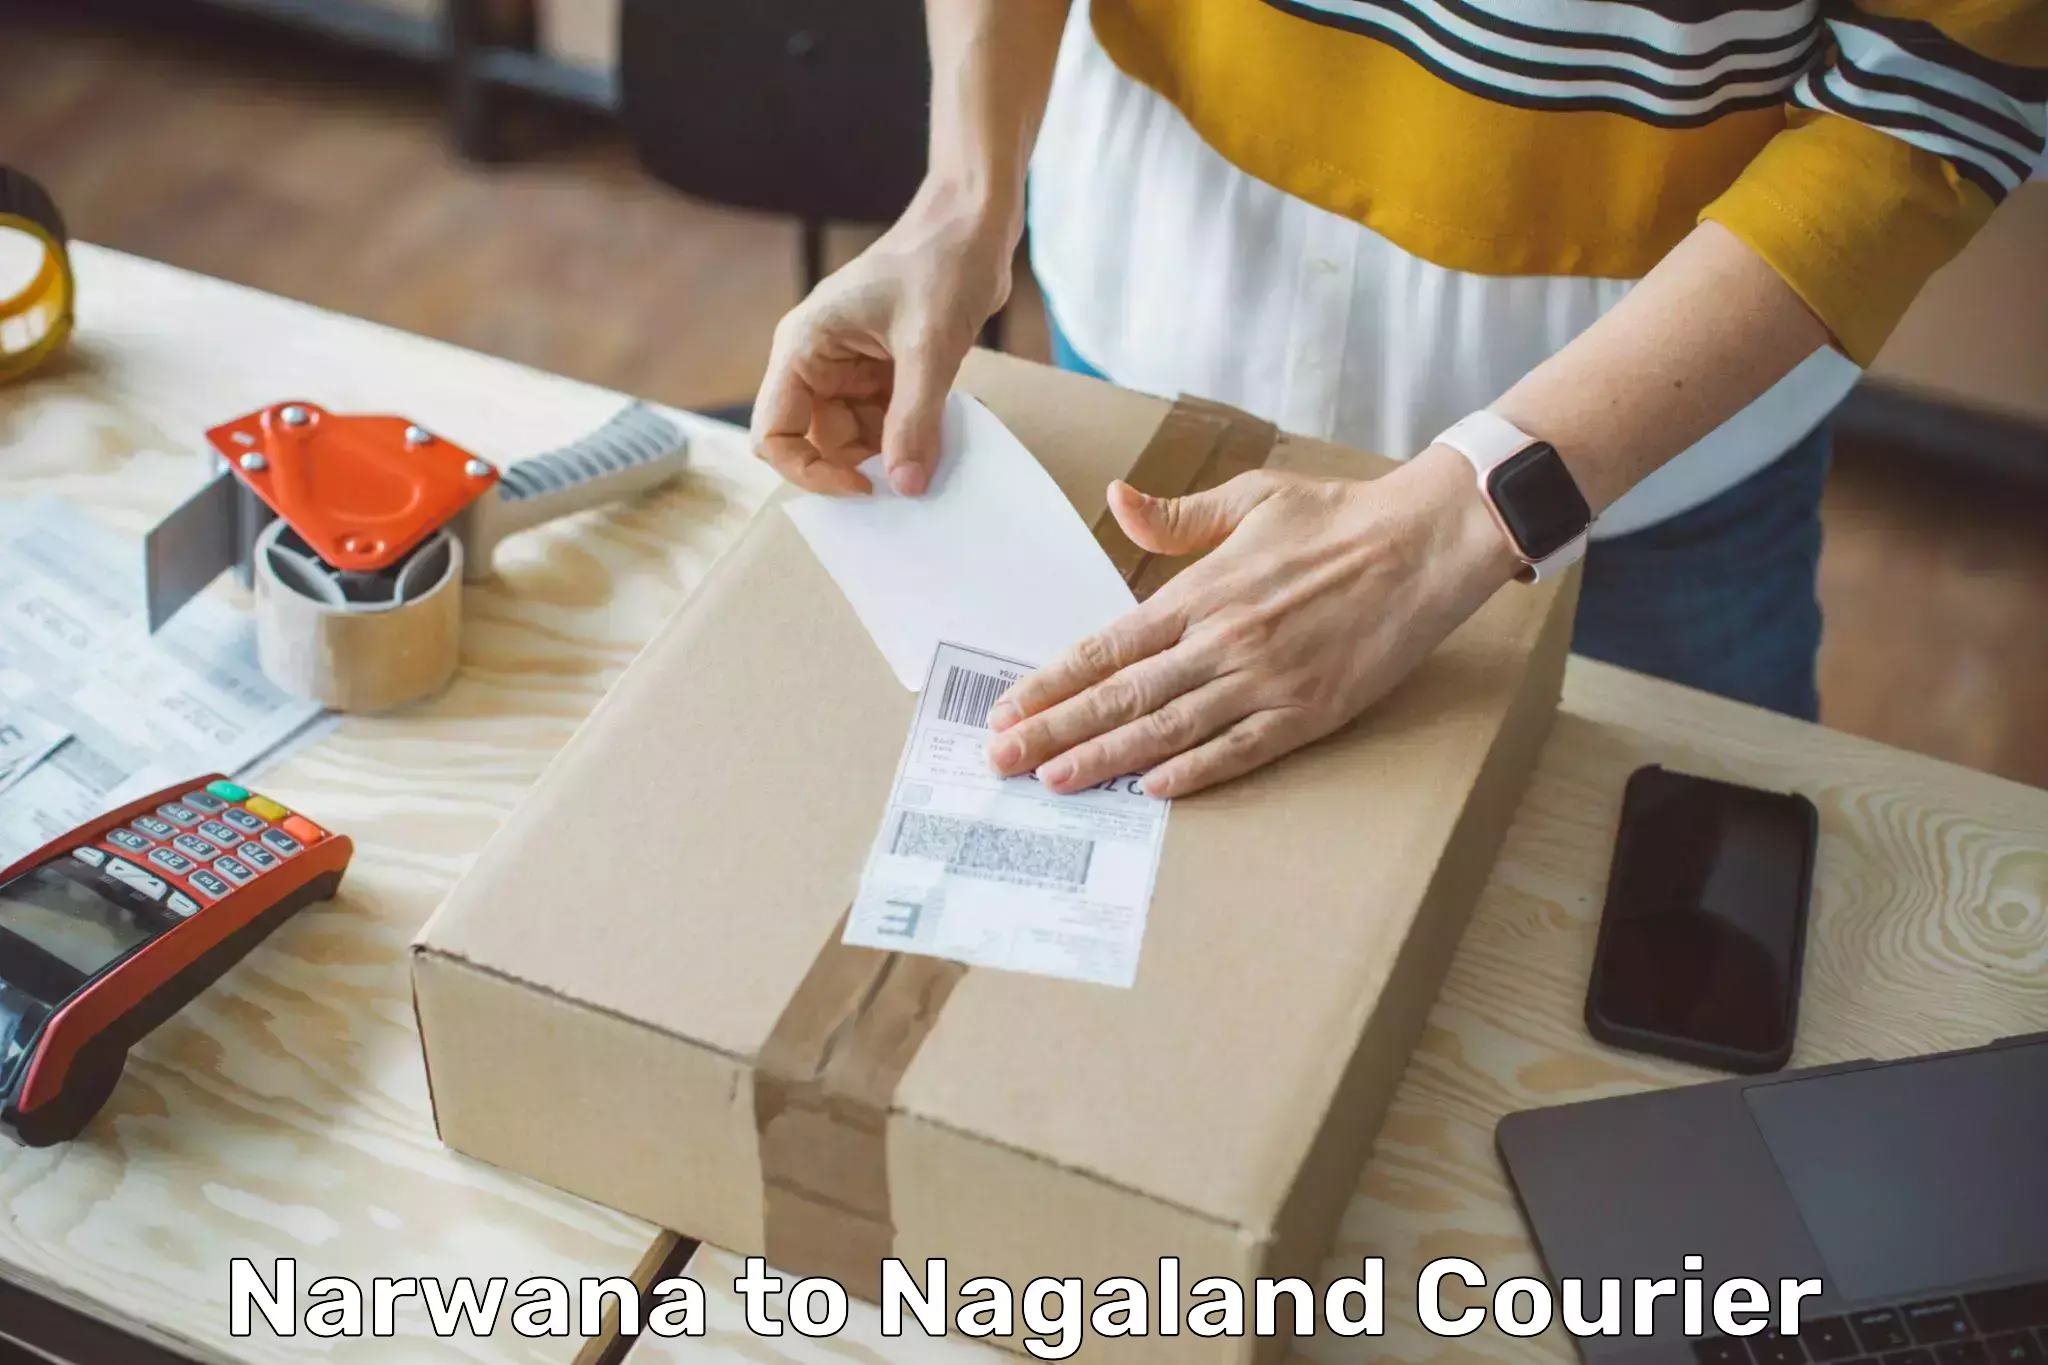 Package delivery network Narwana to NIT Nagaland